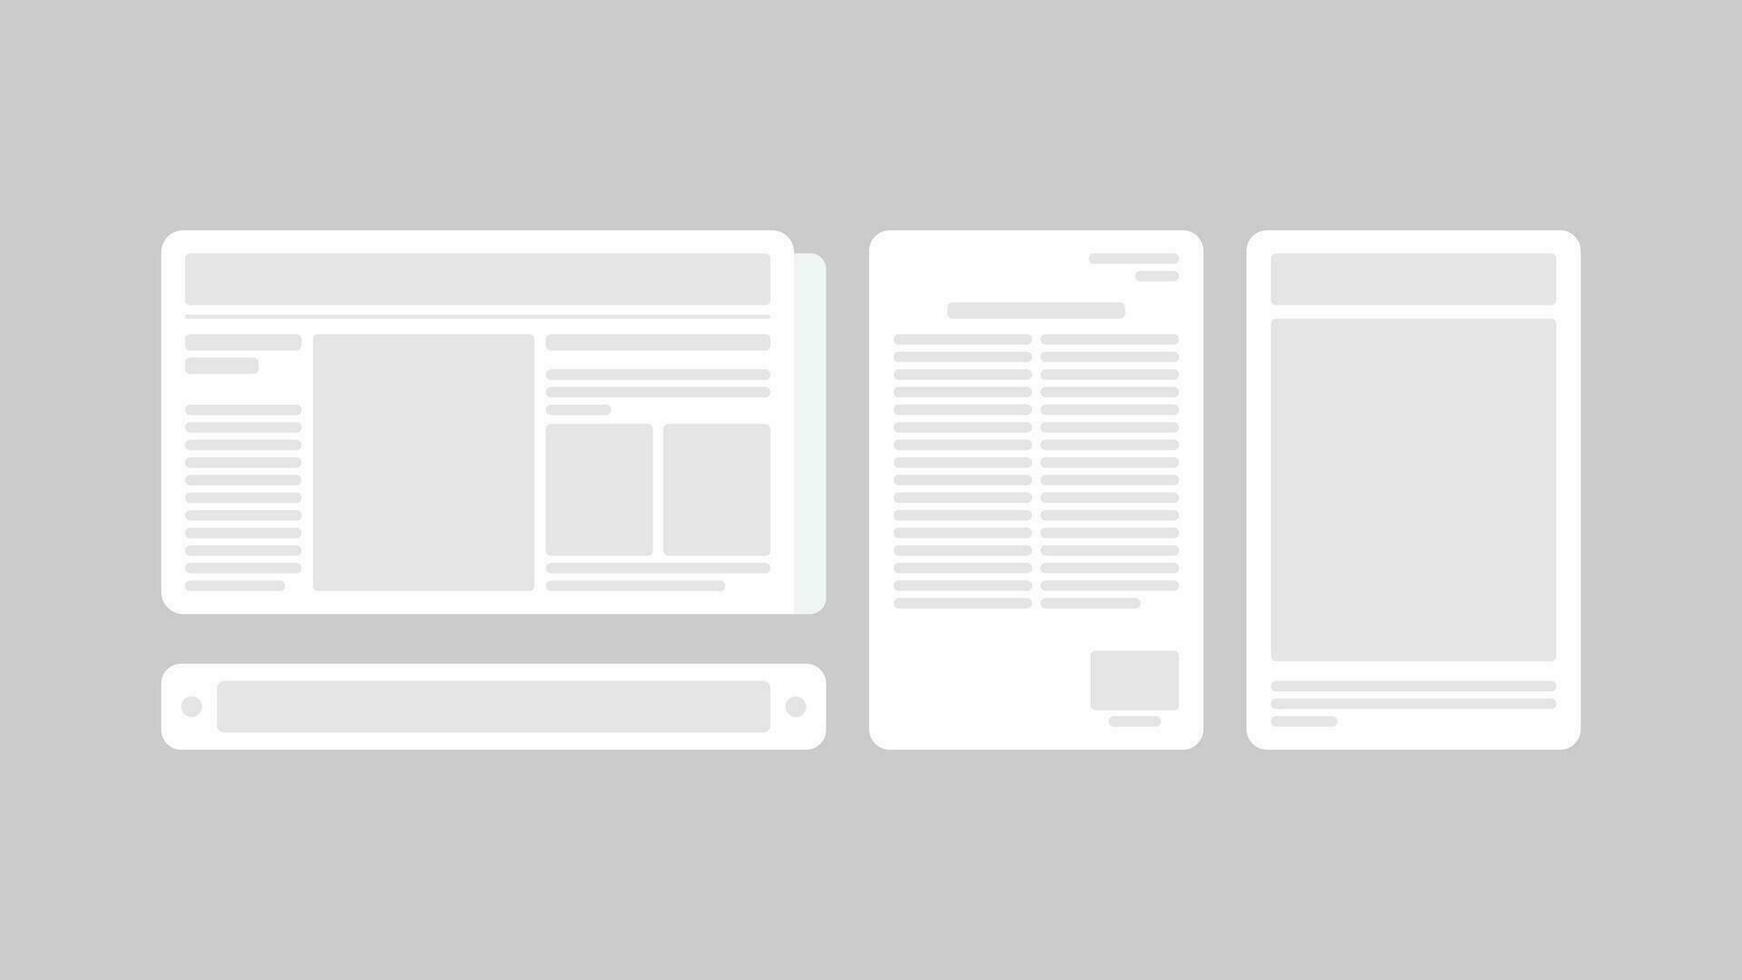 design layouts for newspapers, paper, letters, and nametags in flat design.simple and minimalistic vector